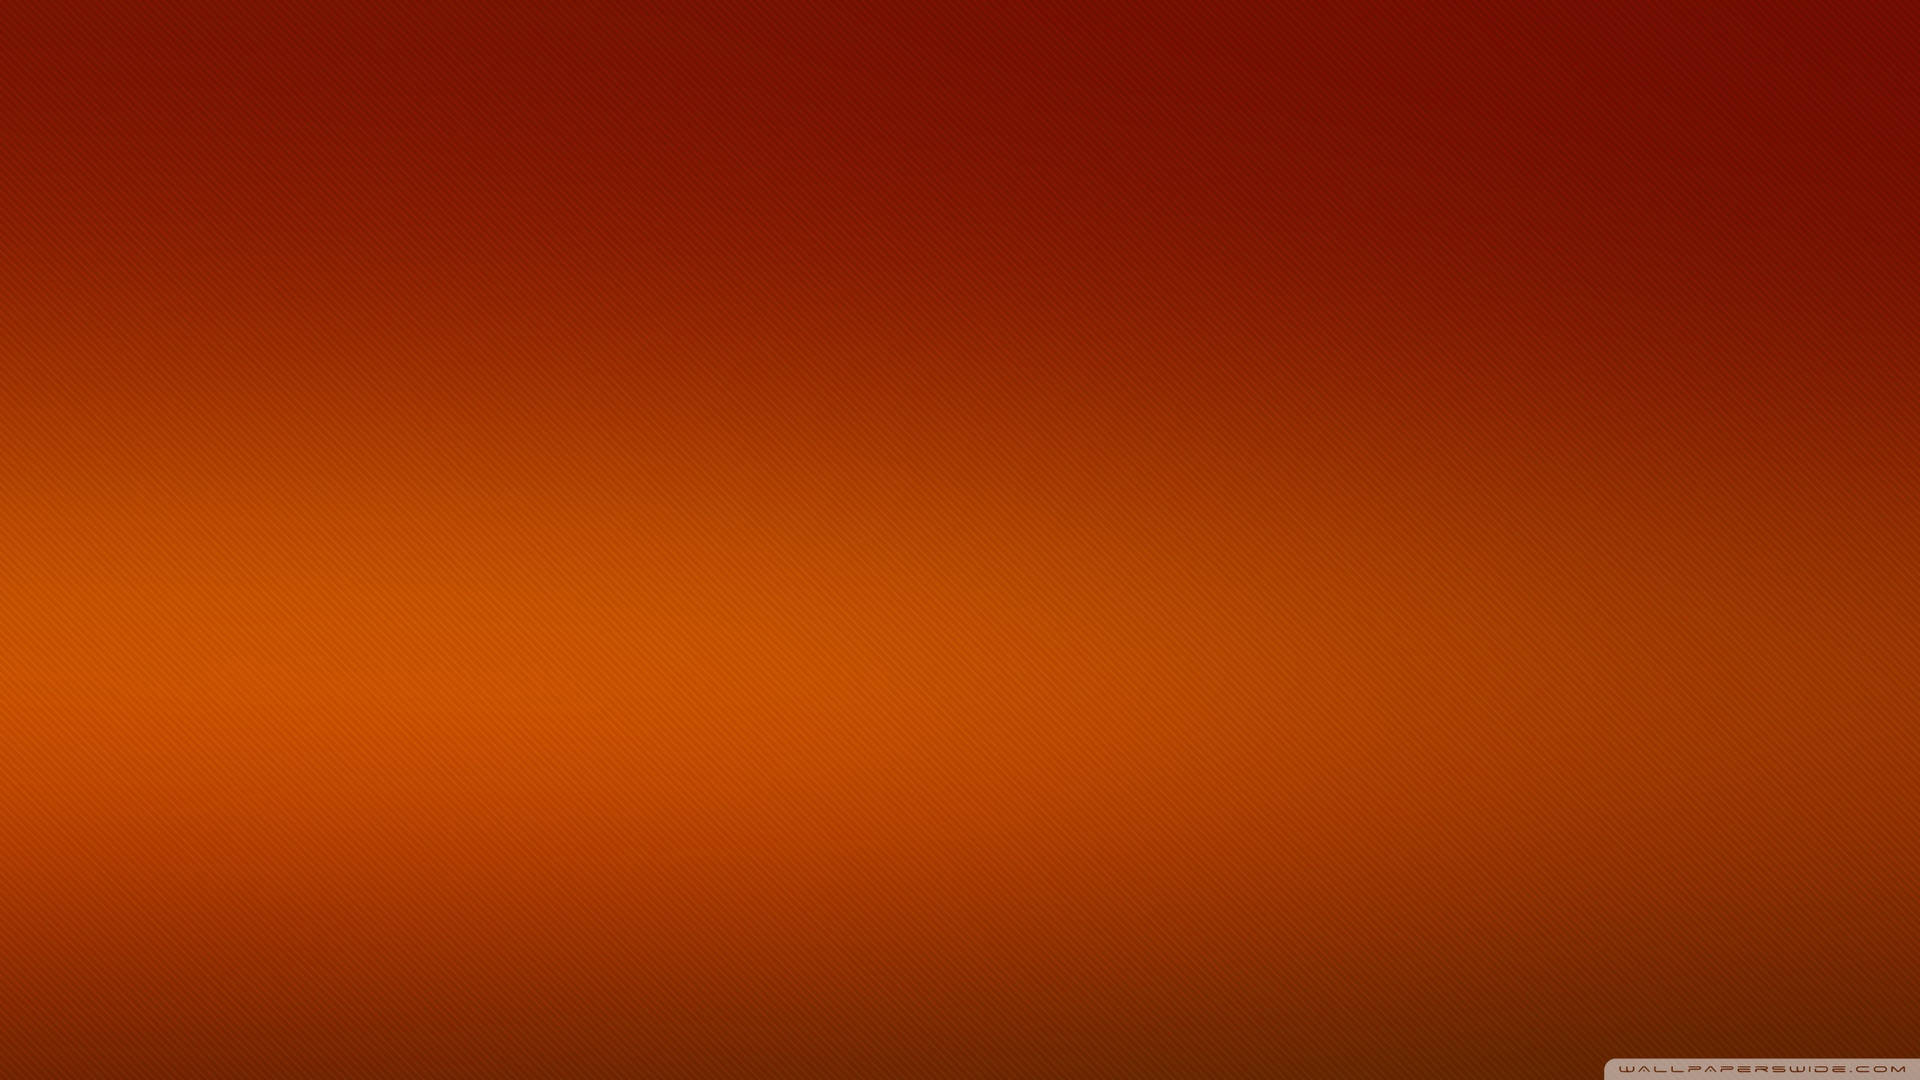 An Orange And Brown Background With A Light Wallpaper